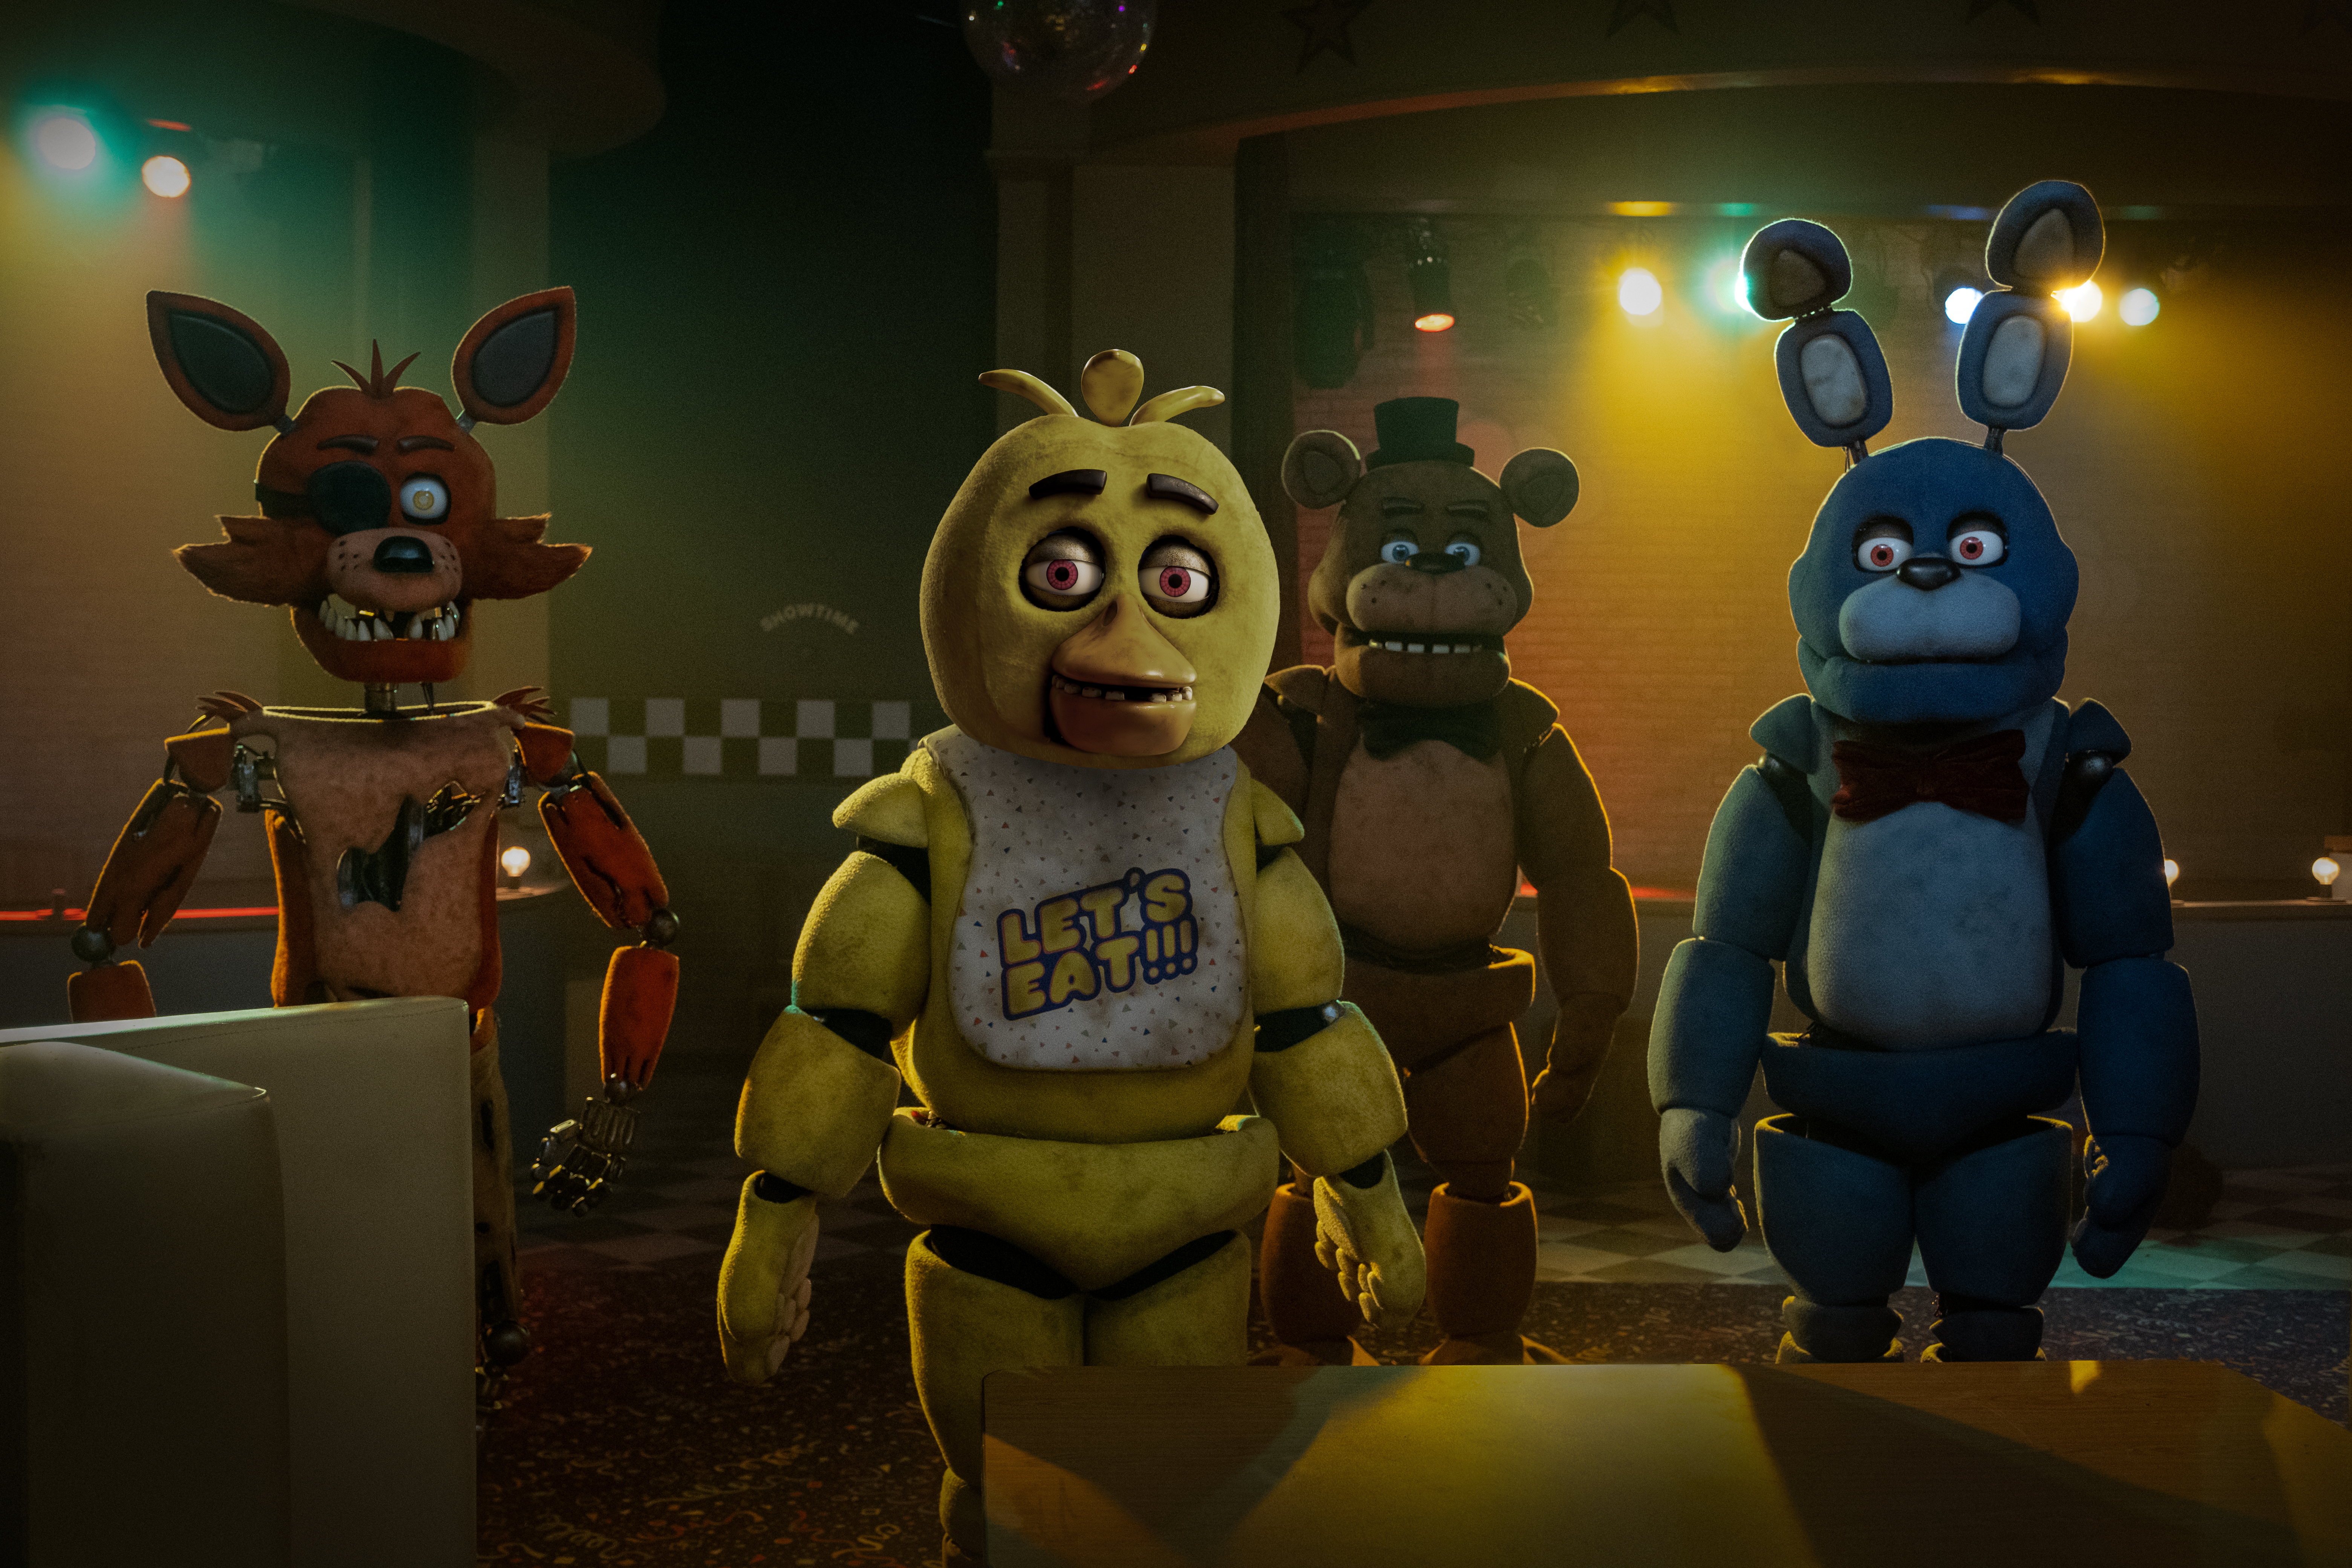 Five Nights at Freddy’s signature animatronics —&nbsp;Foxy, Chica, Freddy Fazbear, and Bonnie — lurk in the darkness in the movie spinoff